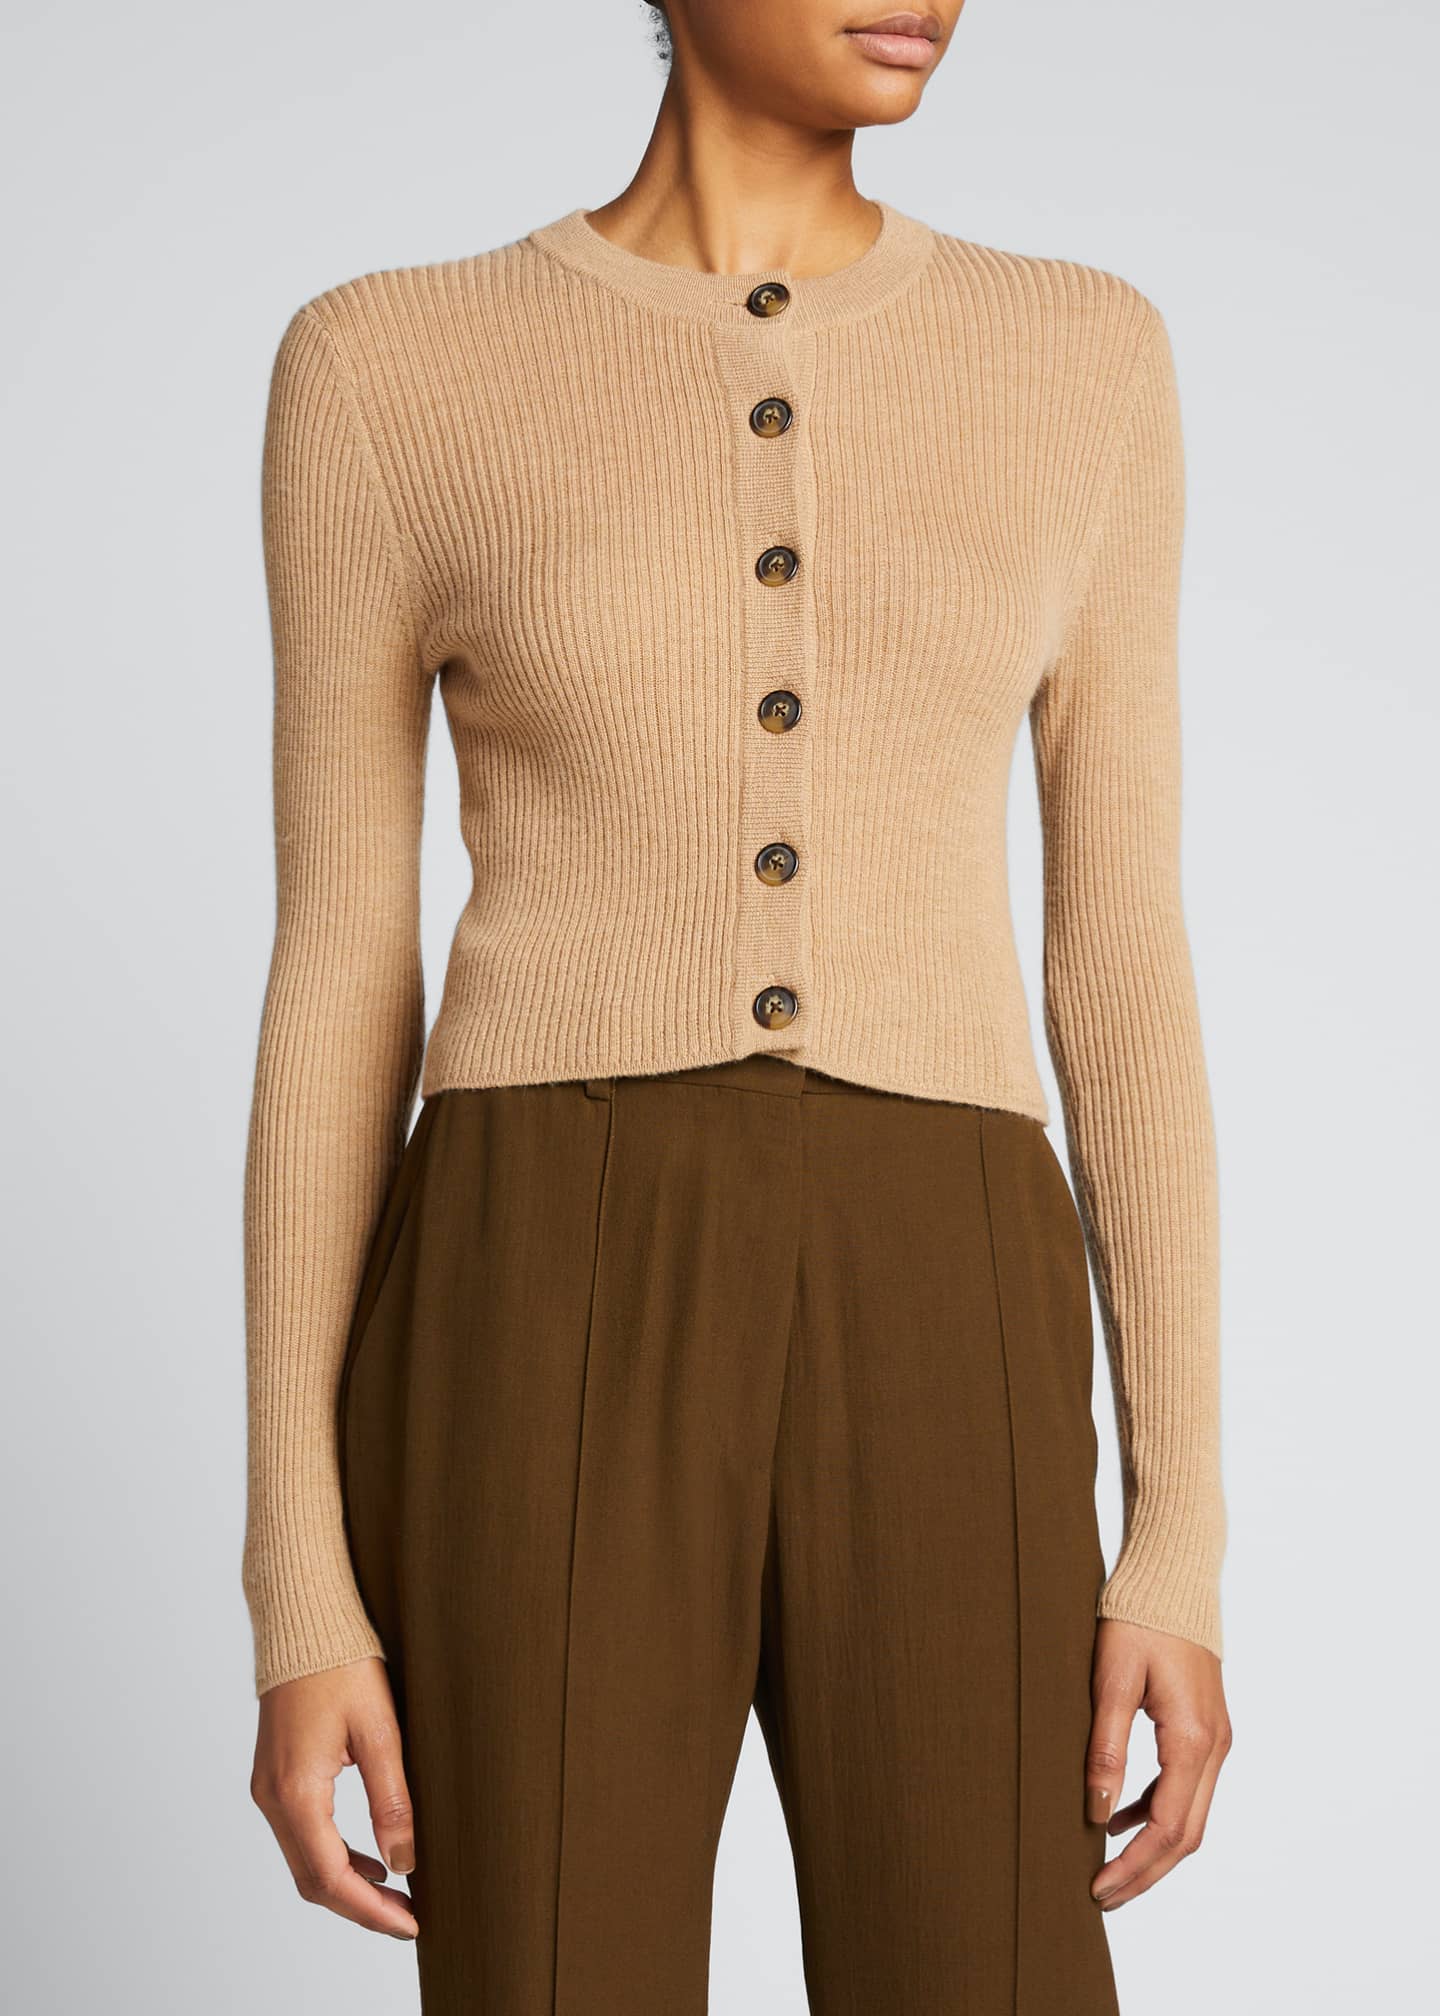 Loulou Studio Contoy Cropped Ribbed Cardigan - Bergdorf Goodman